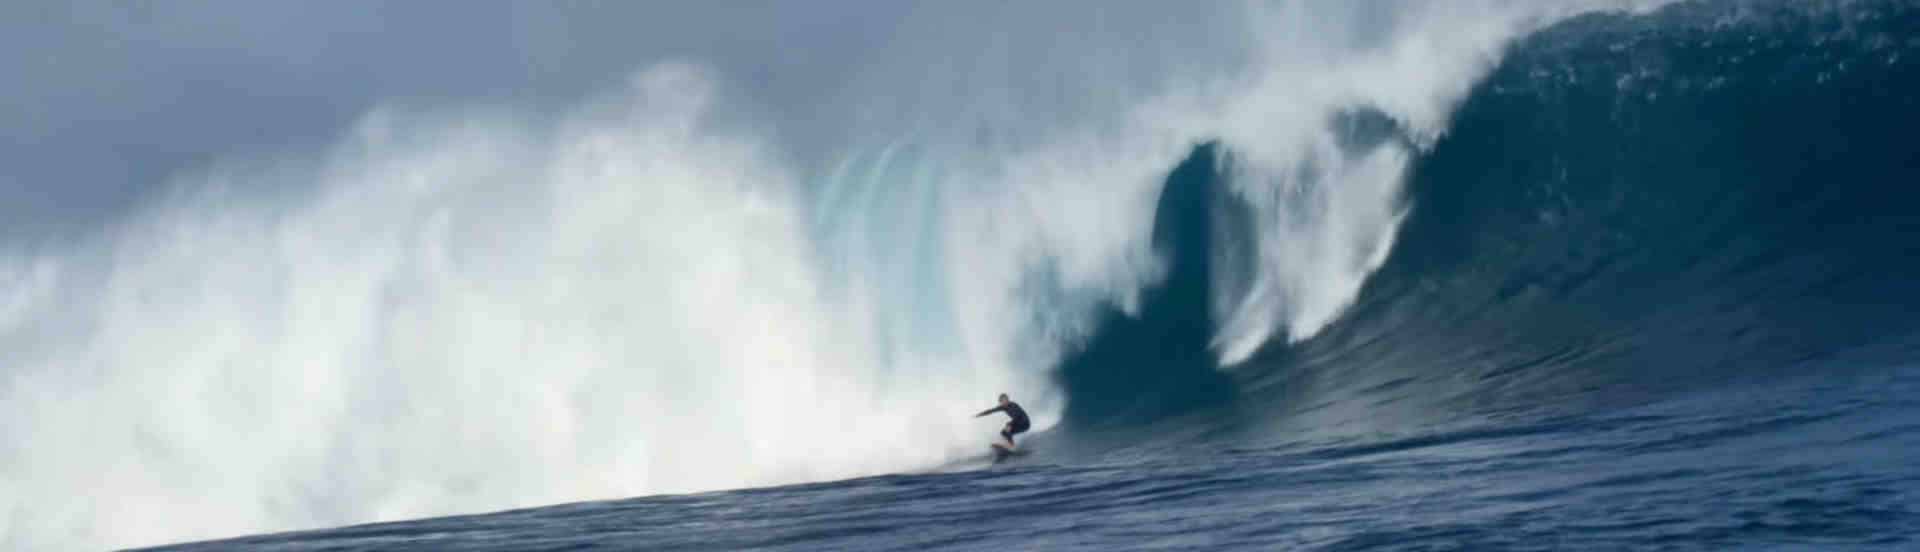 How do you breathe while surfing?